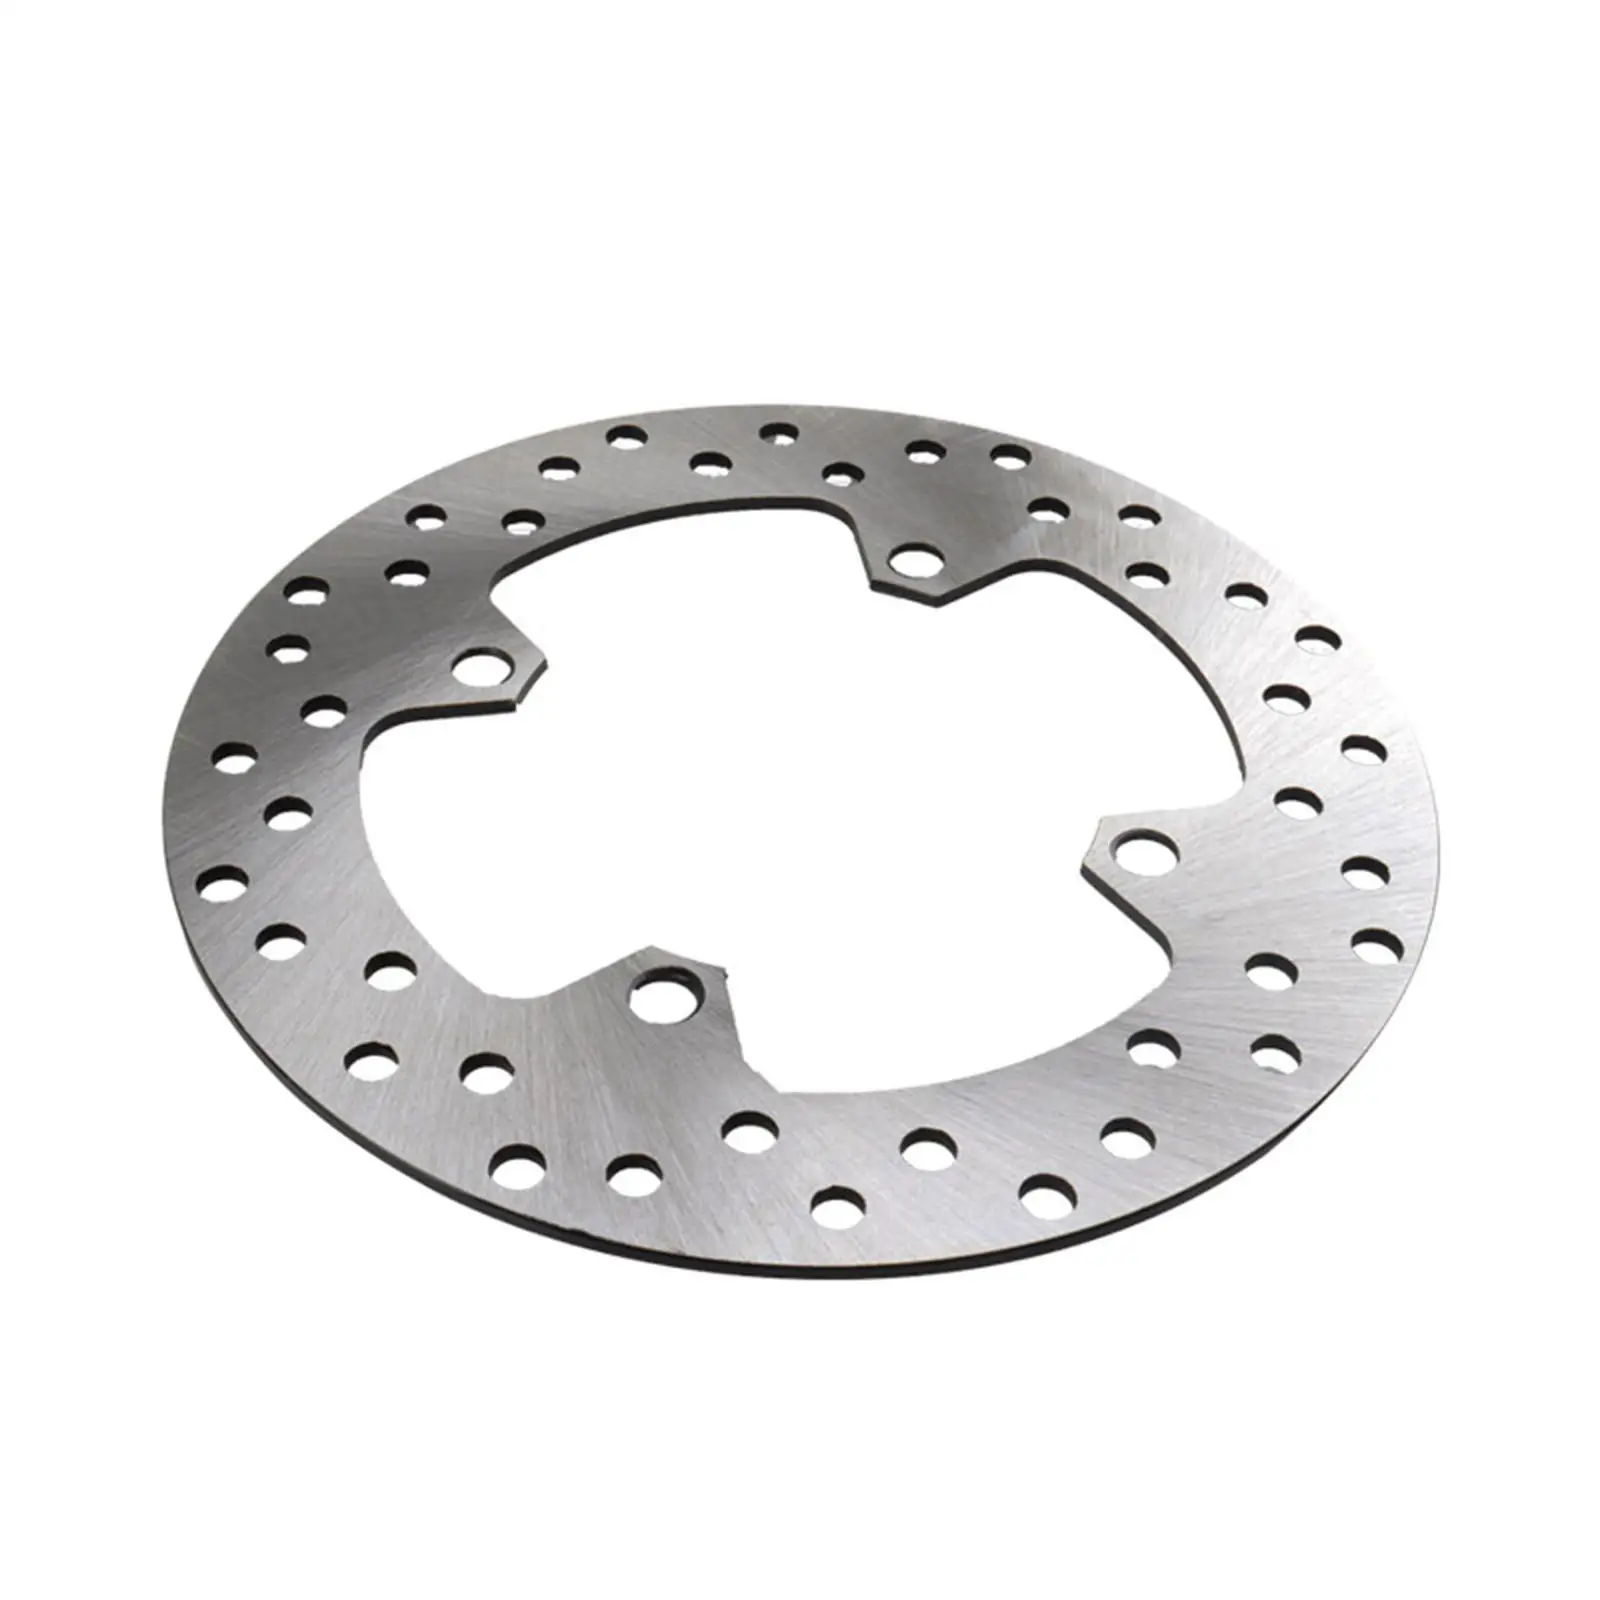 Motorcycle Brake Disc Rotor Wear Resistant Professional Replaces Assembly for Honda CBR125R XR250R Xlv Varasx125 TRX400EX